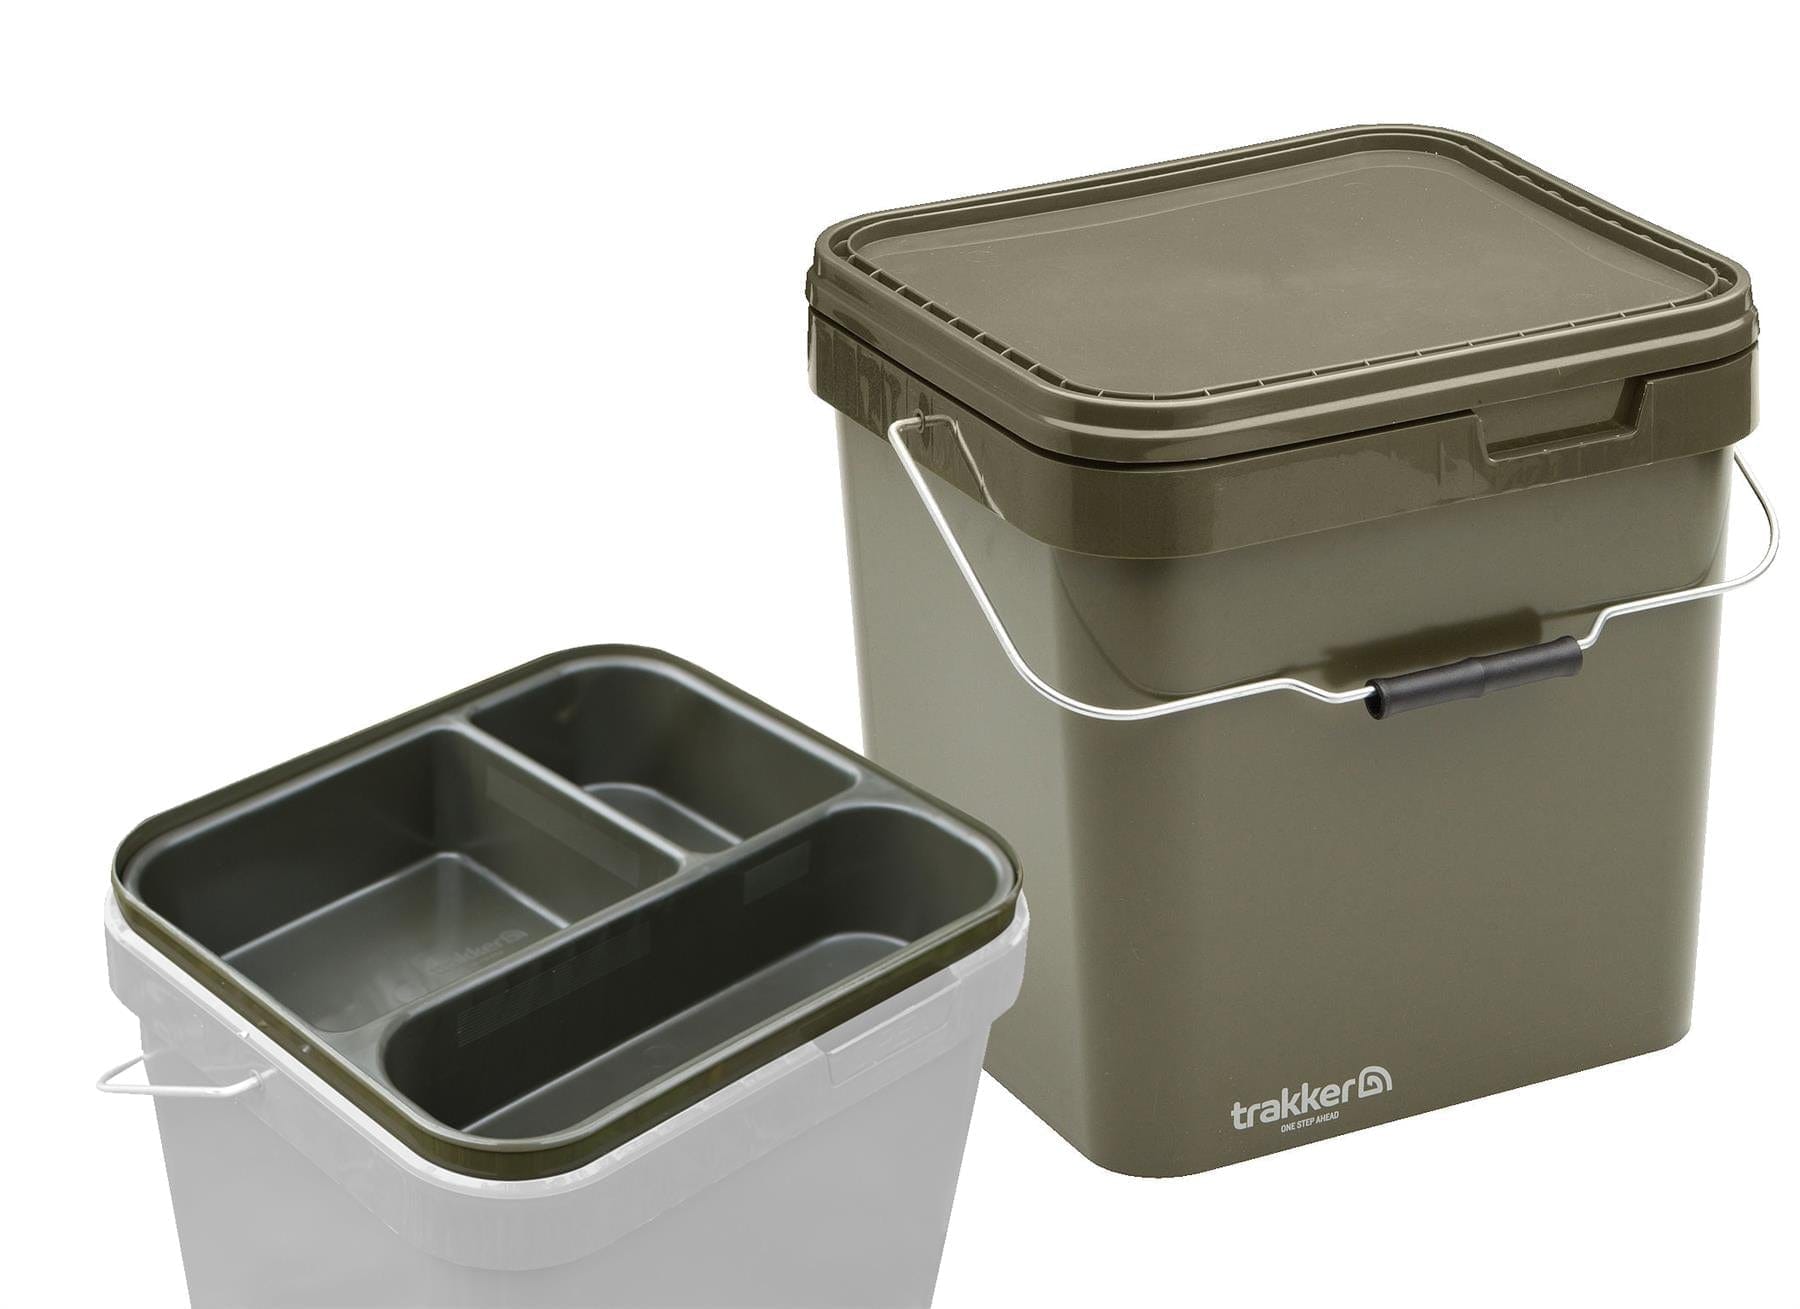 Trakker 17Ltr Olive Square Bucket Container with Cuvette Tray.